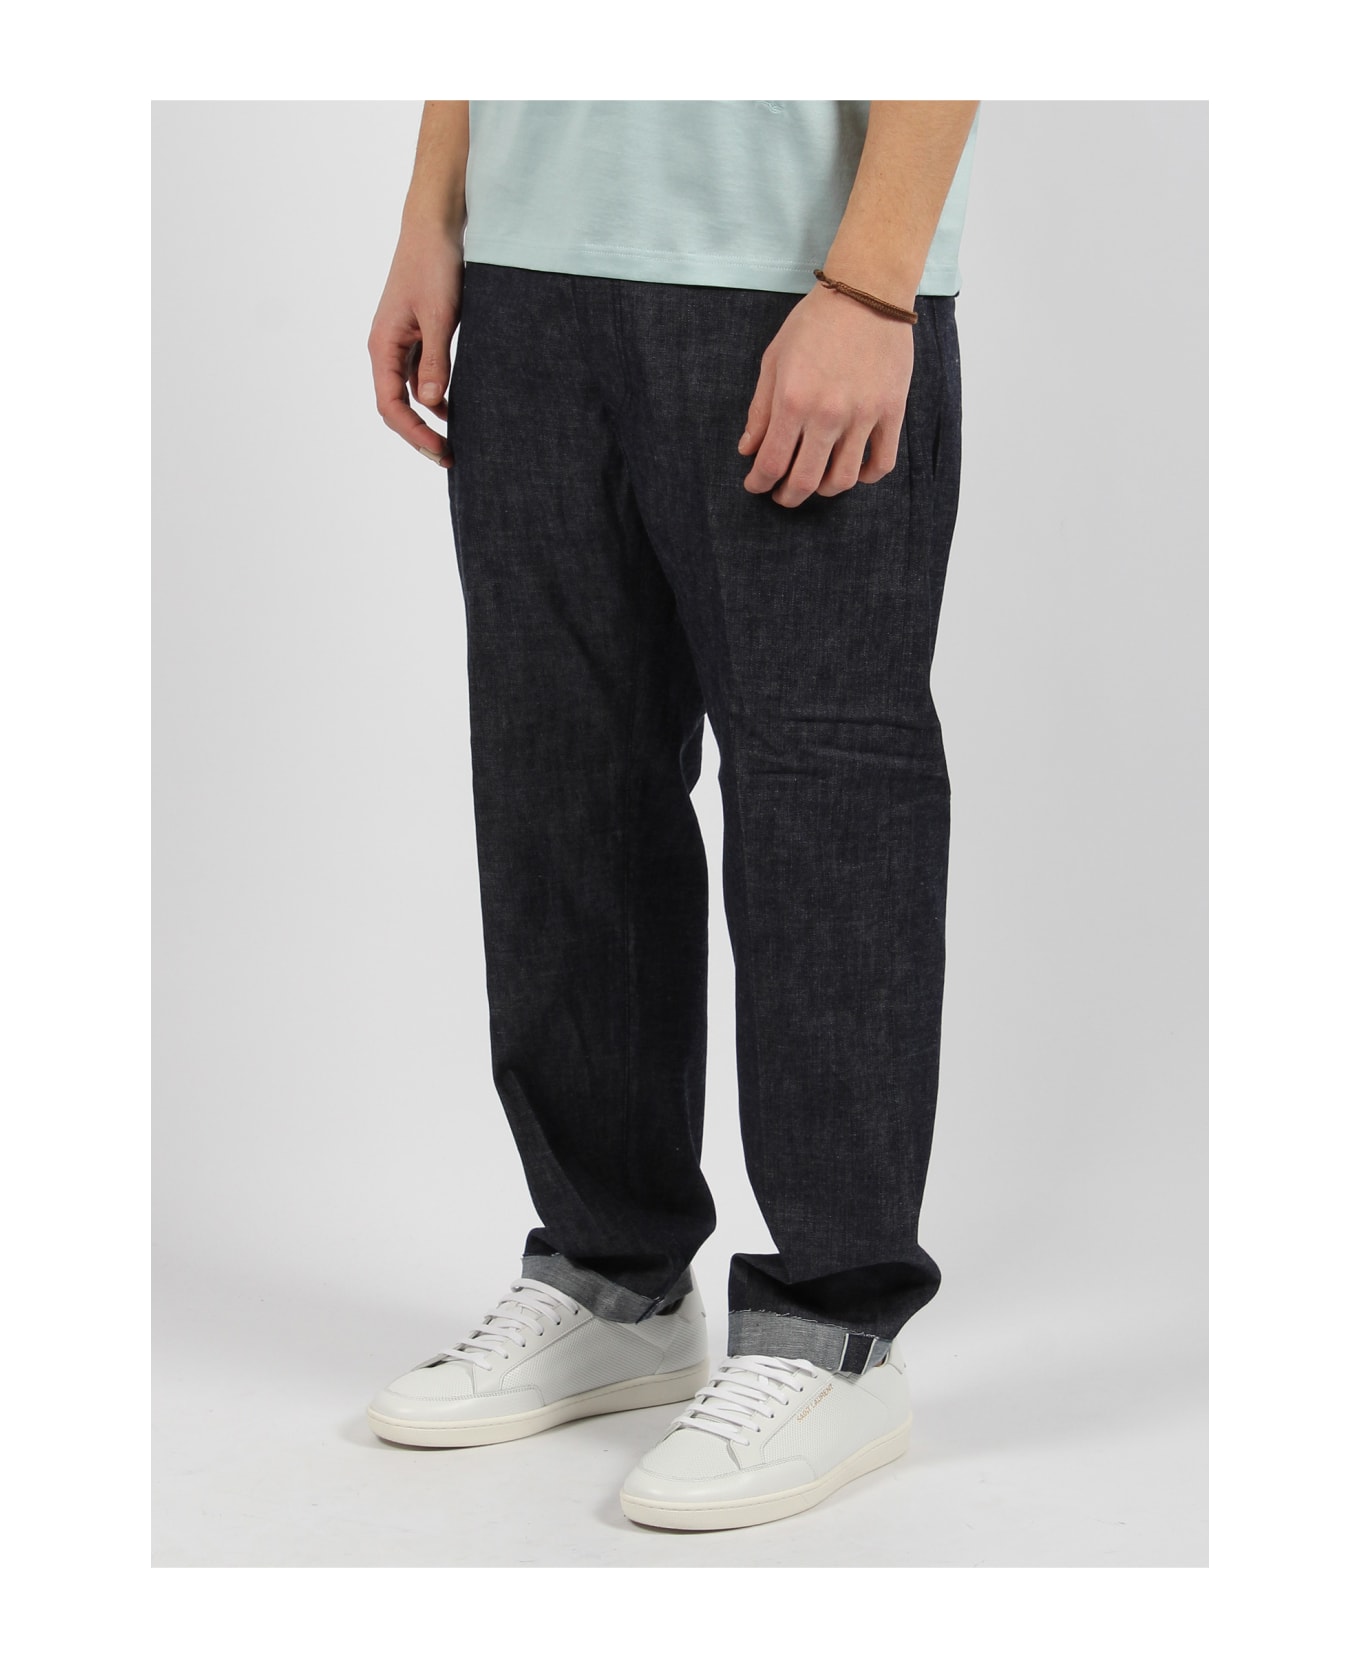 Nine in the Morning Tim Chino Pant - Blue